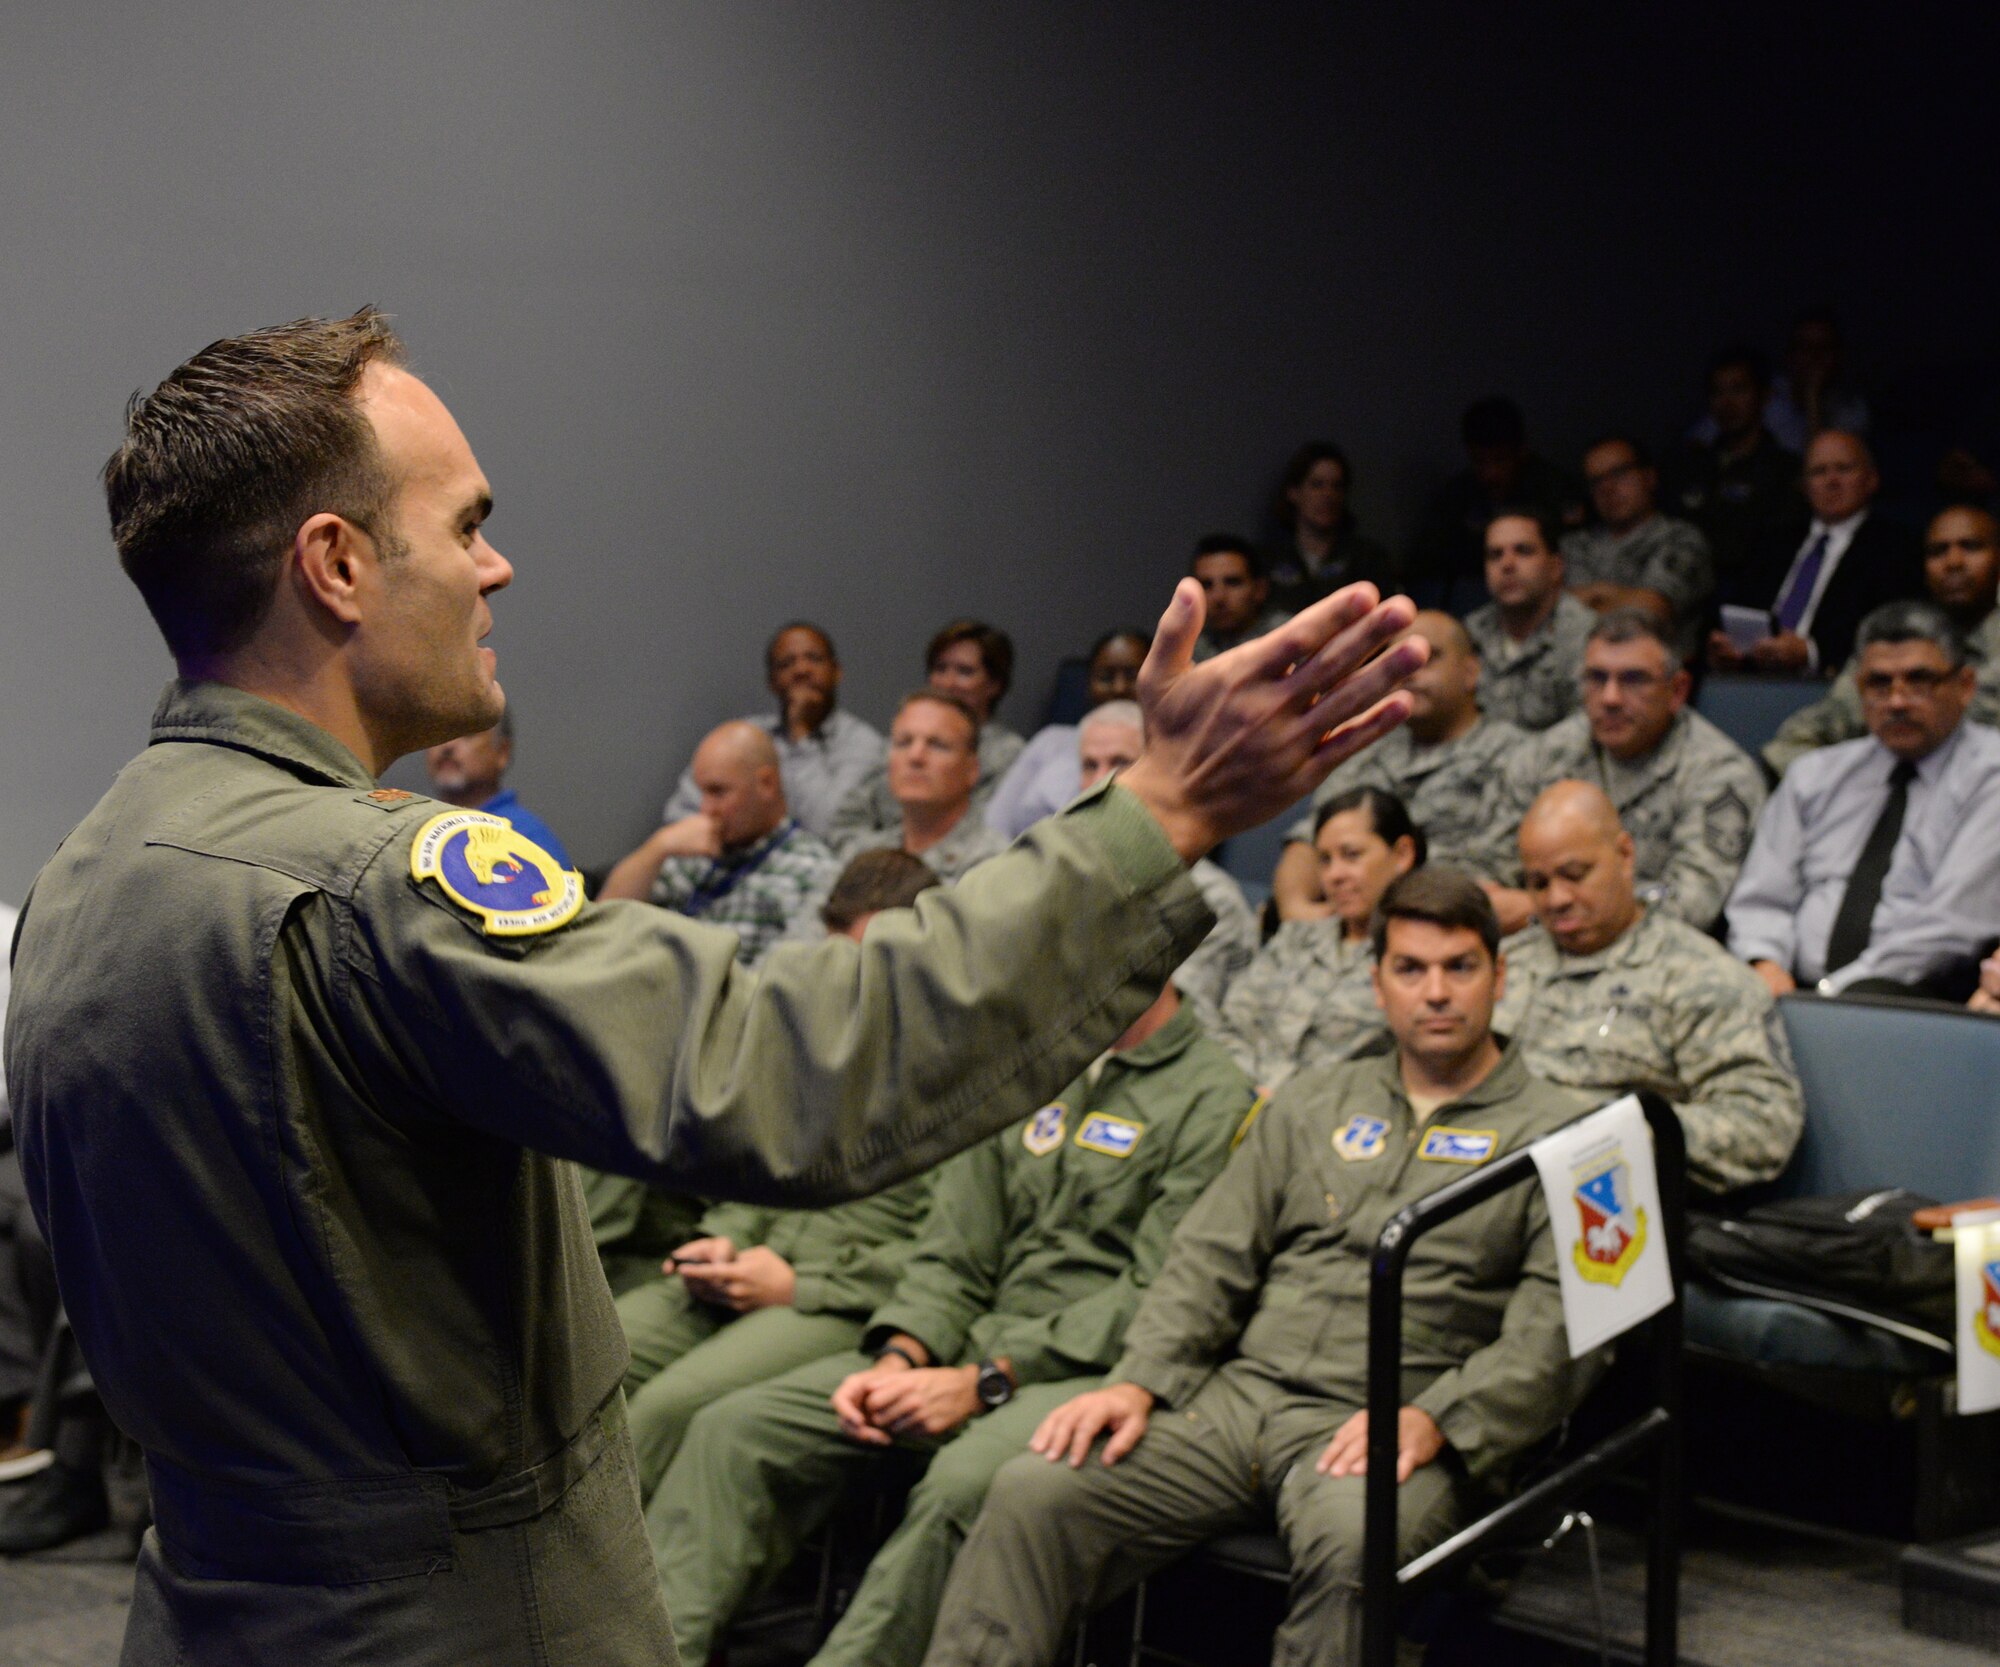 N.H. Air National Guard Maj. Michael J.  Sanders, KC-46 program integration officer, speaks to audience members during the KC-46 Site Activation Task Force visit at Pease Air National Guard Base, N.H., July 14, 2015.  Subject matter experts from the National Guard Bureau, Air Mobility Command, KC-46 Systems Program Office, Boeing, Flight Safety, McConnell Air Force Base and Altus AFB are on hand to help field the KC-46 at Pease. (N.H. Air National Guard photo by Staff Sgt. Curtis J. Lenz)
